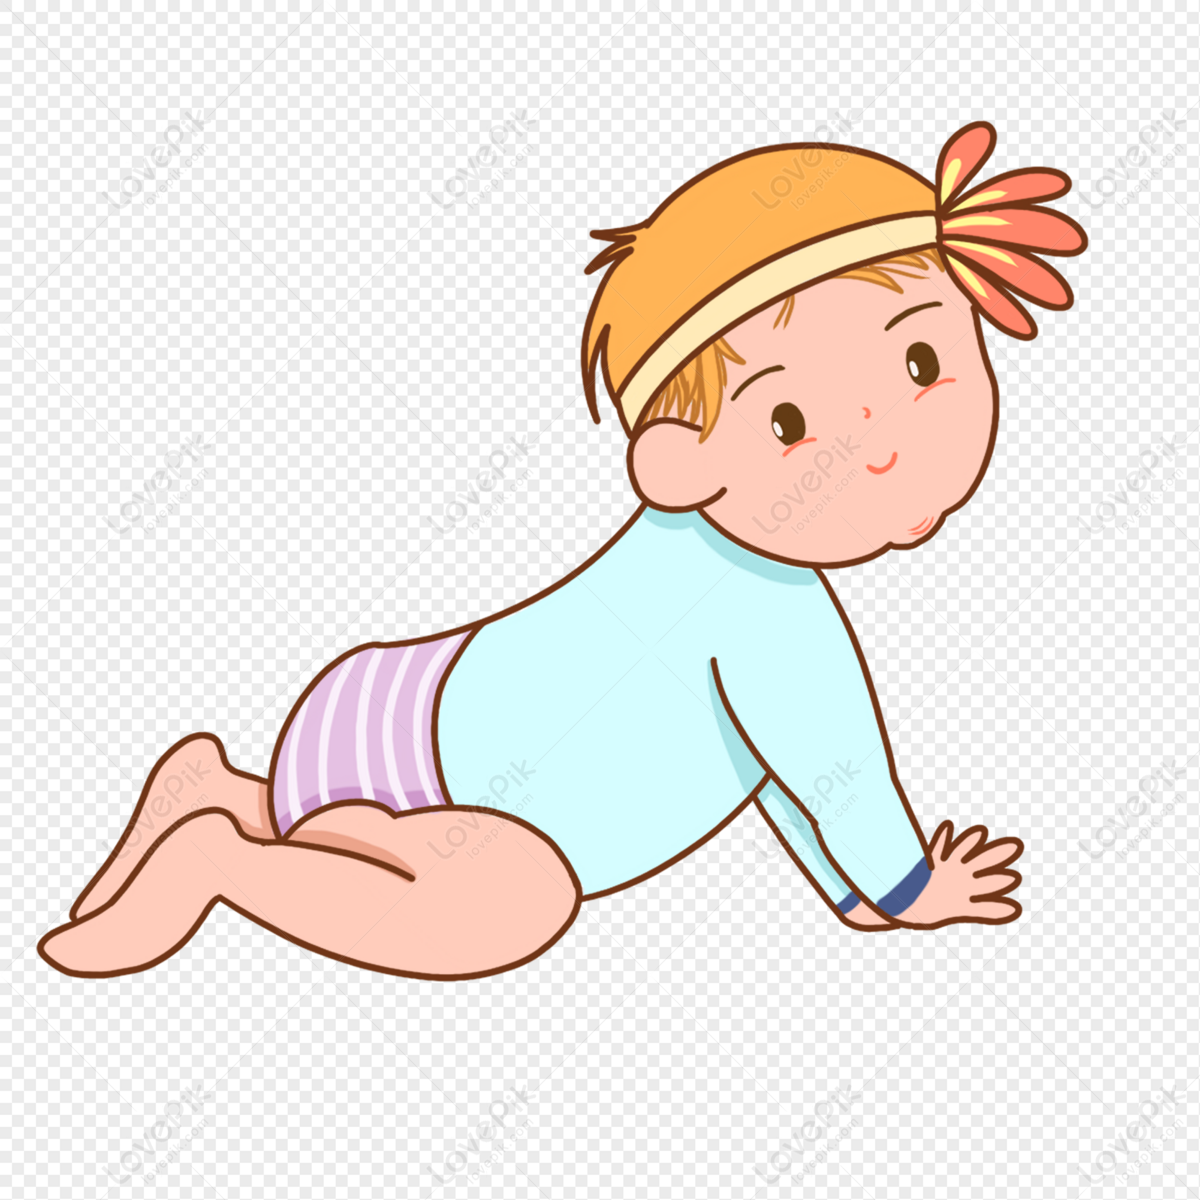 Cartoon Yellow Short Hair Baby Playing On The Ground PNG Transparent And  Clipart Image For Free Download - Lovepik | 401547356